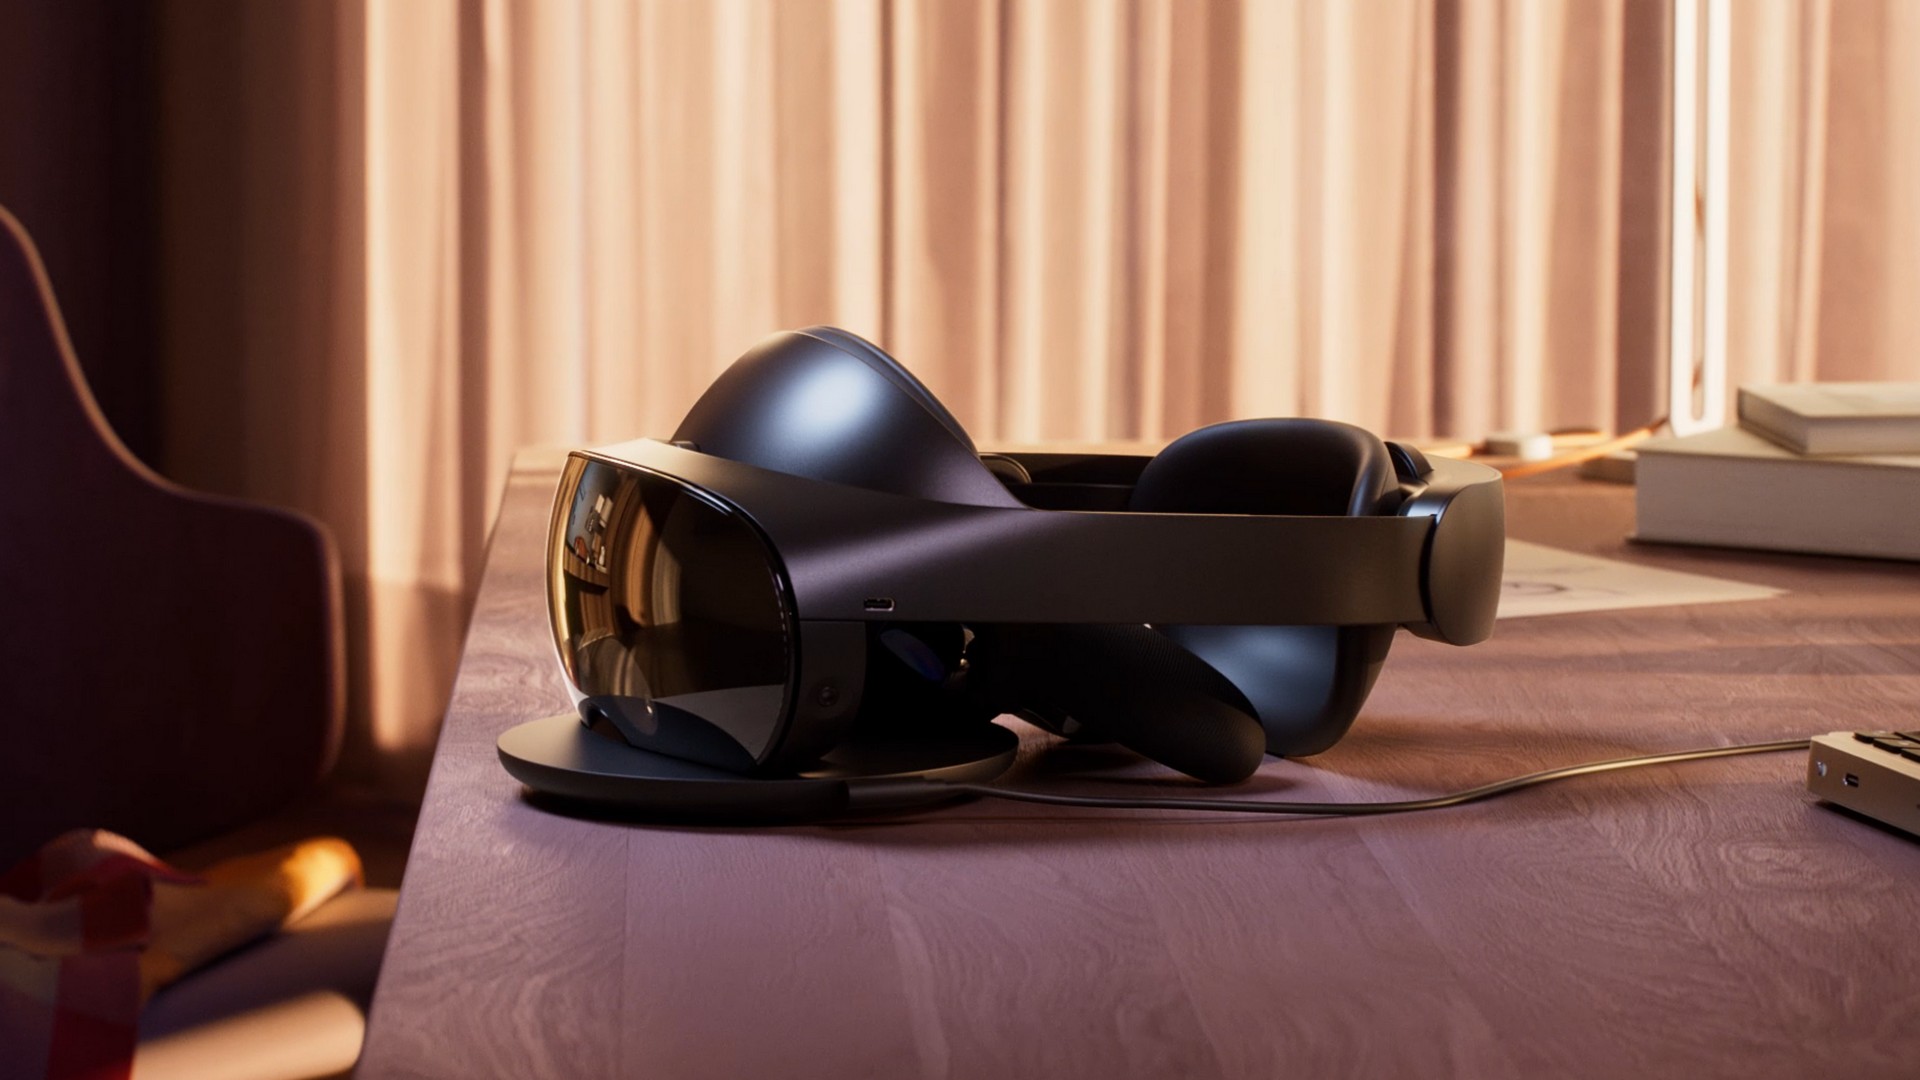 The Quest Pro deserves a second chance – as a Valve Index upgrade